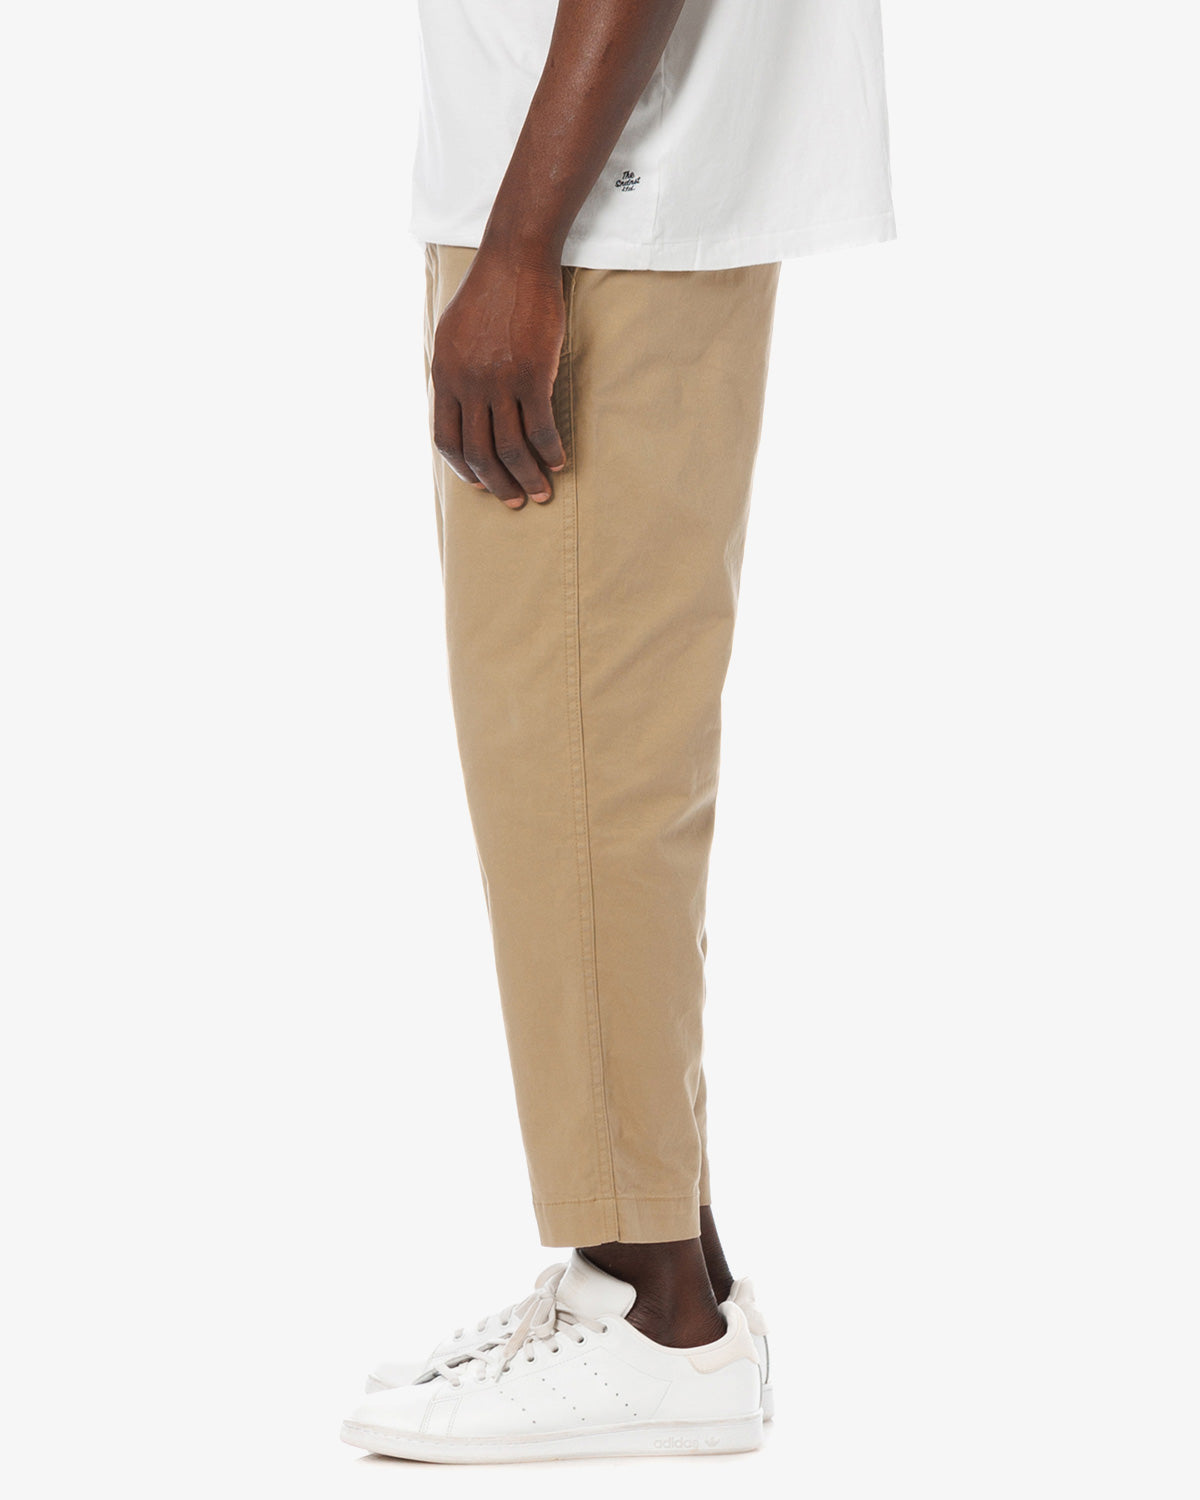 CHINO PANTS - STRETCH ANKLE CUT